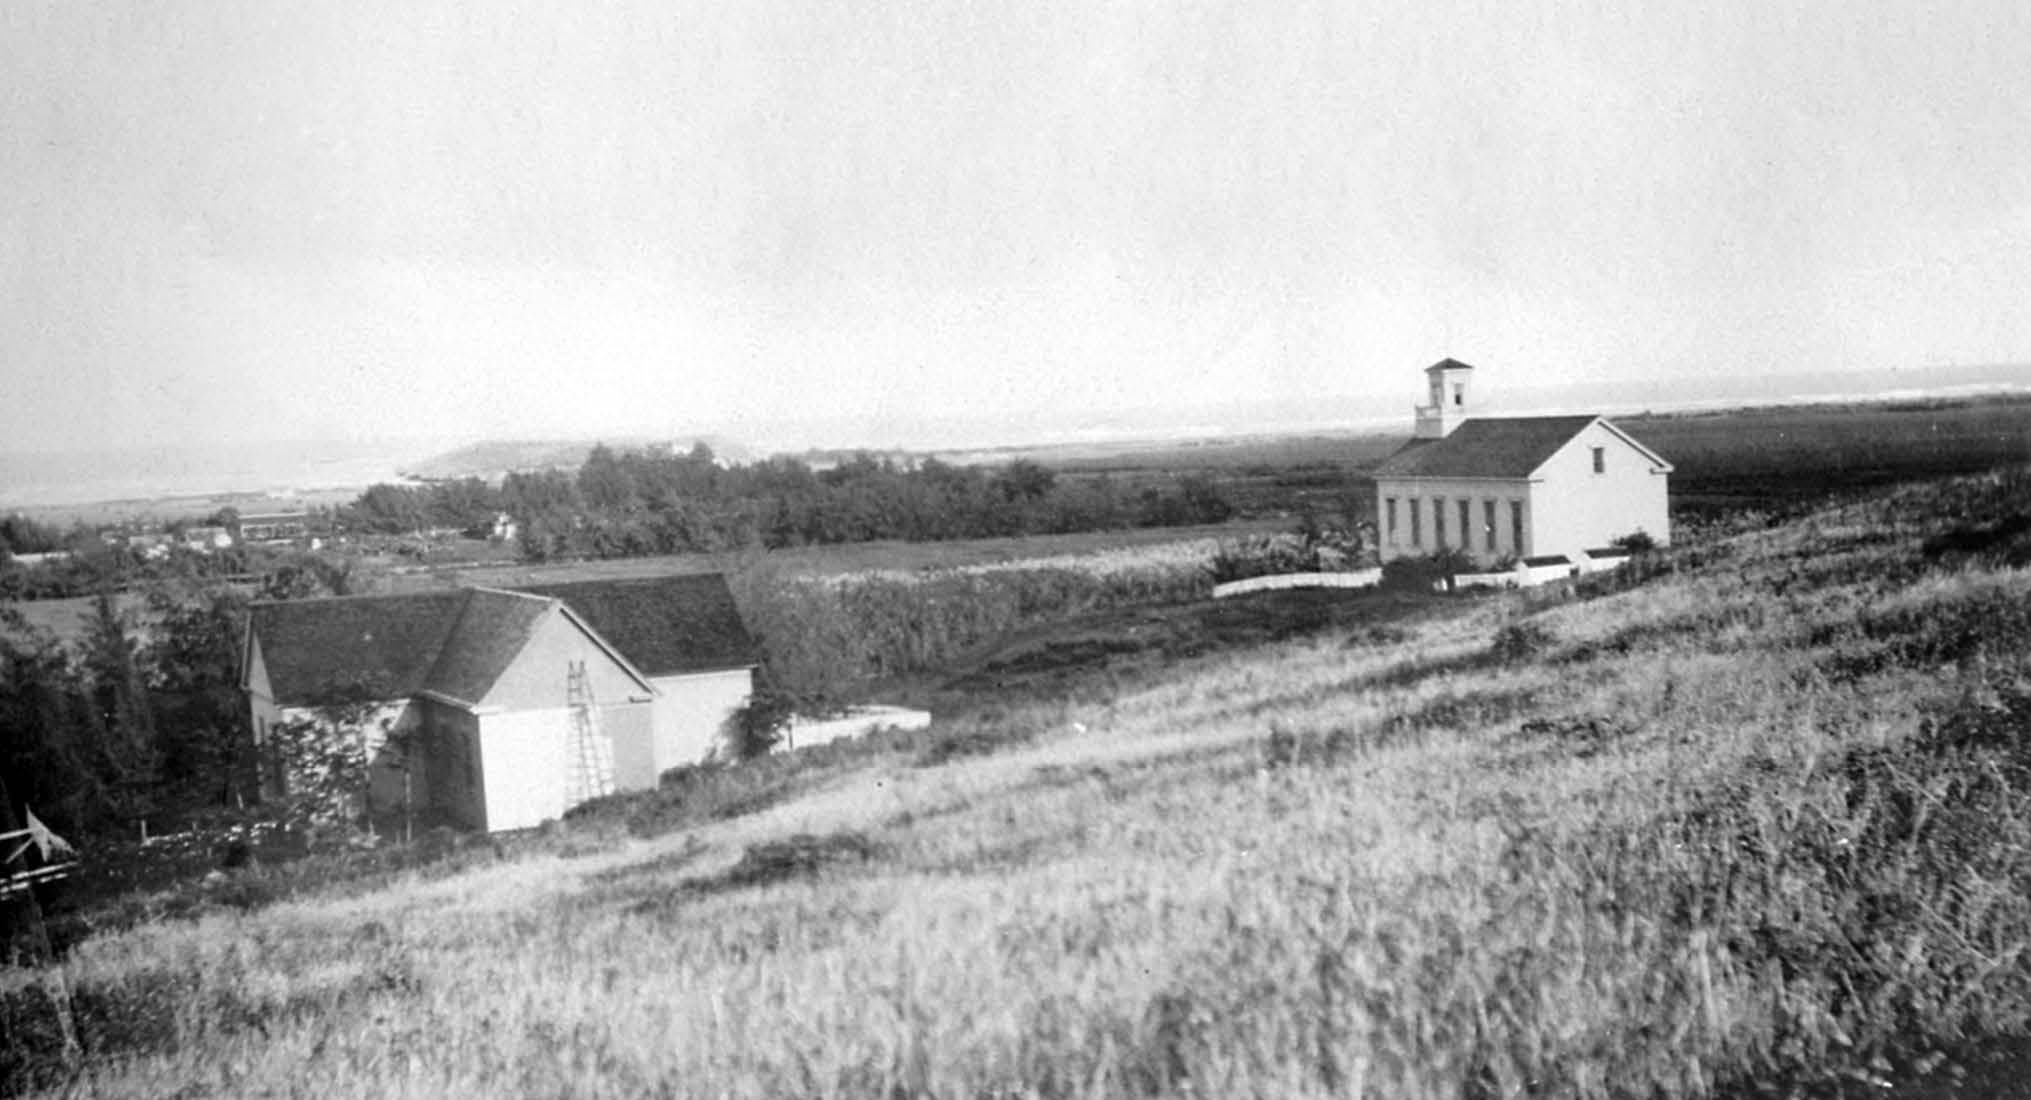 The dedicated temple site where the chapel then stood is on a small hill gently sloping to the east overlooking the community of Lāʻie and the ocean beyond. Courtesy of Church History Library.